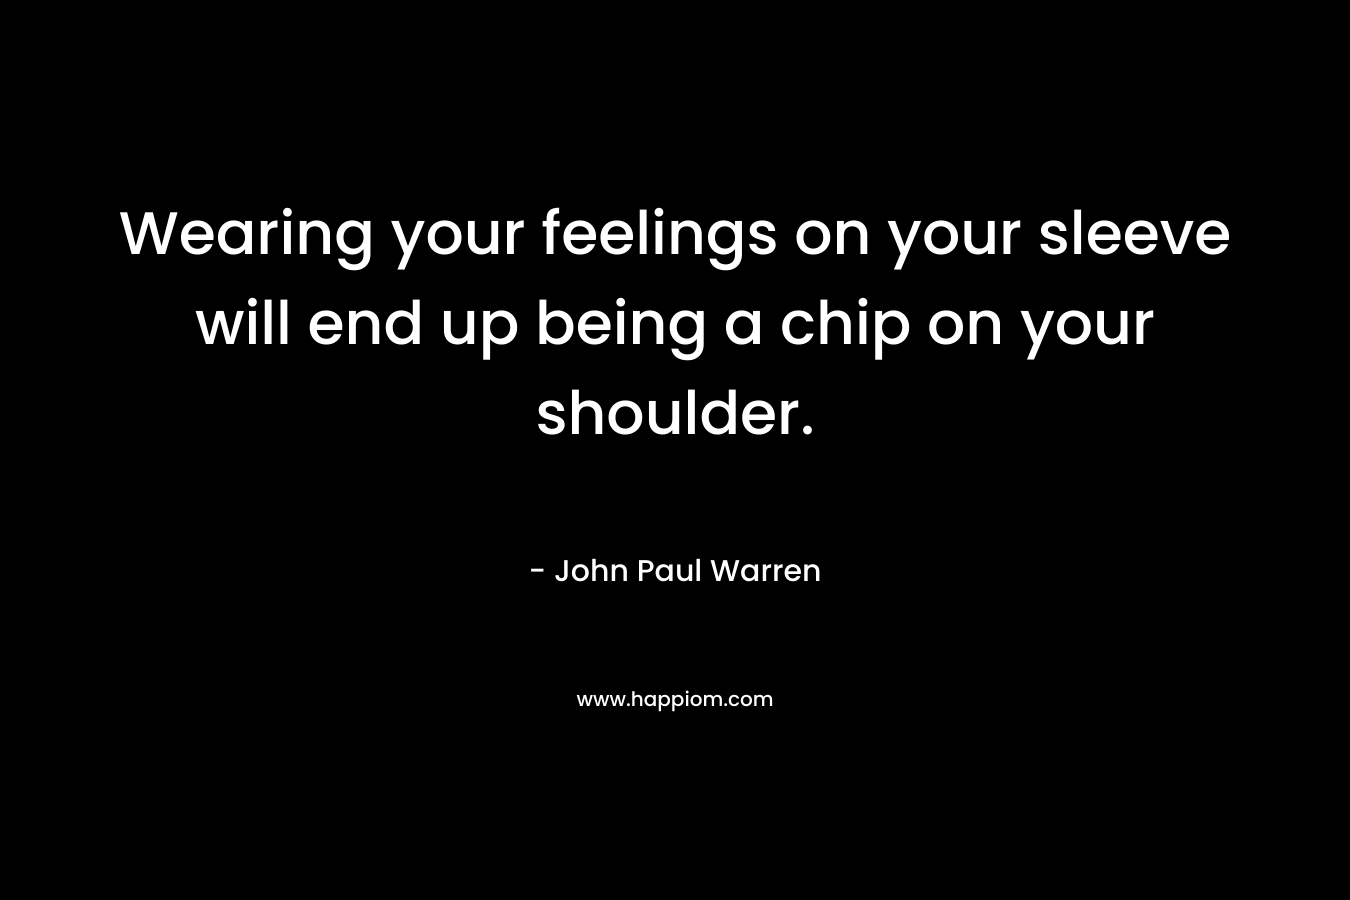 Wearing your feelings on your sleeve will end up being a chip on your shoulder. – John Paul Warren